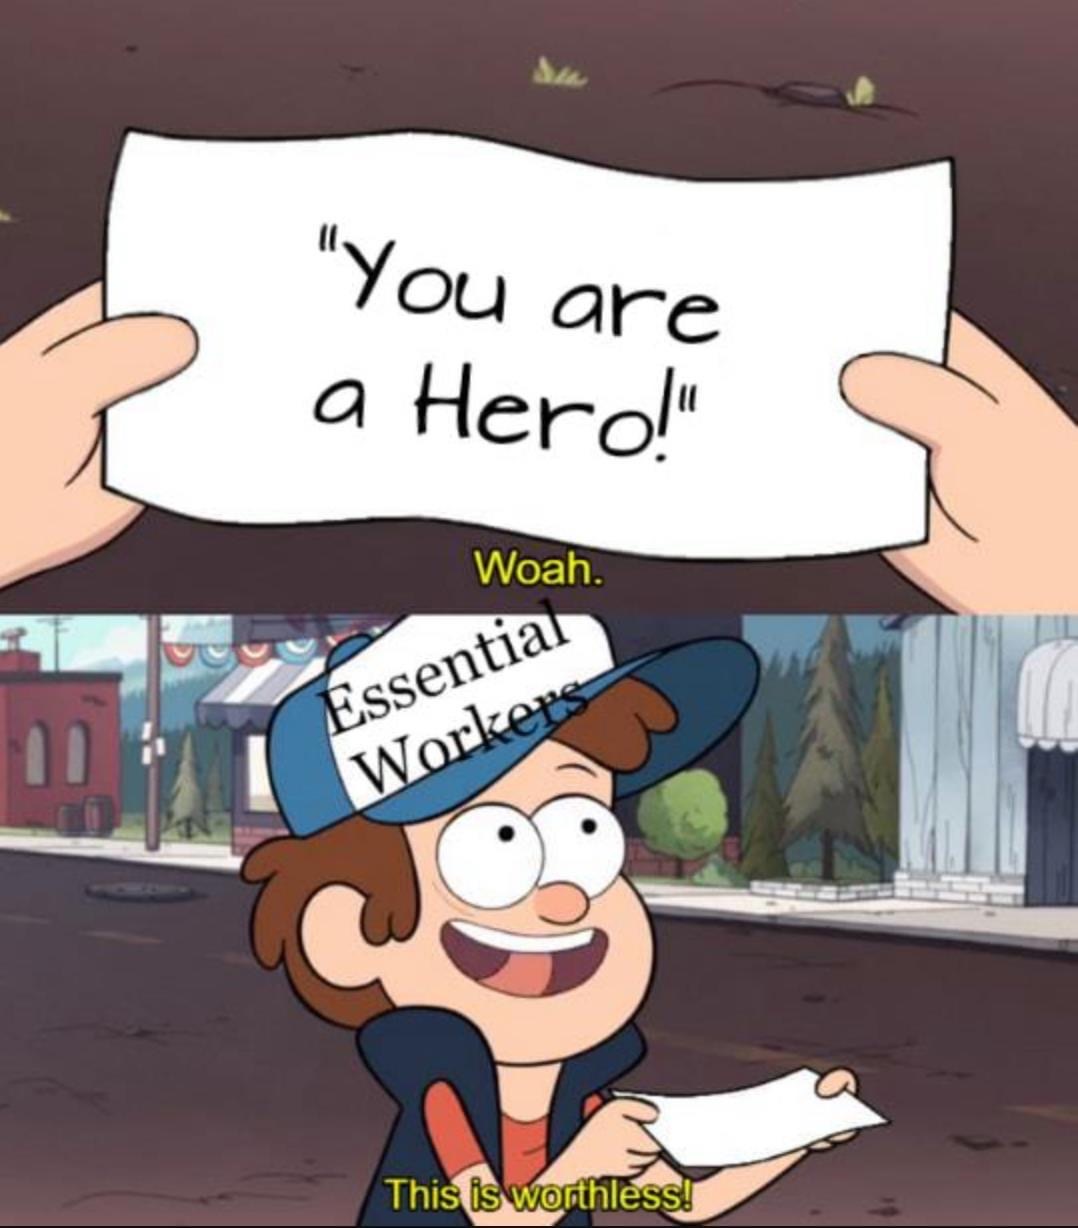 essential workers meme - "You are a Hero!" Woah. Essential Workers This is worthless!